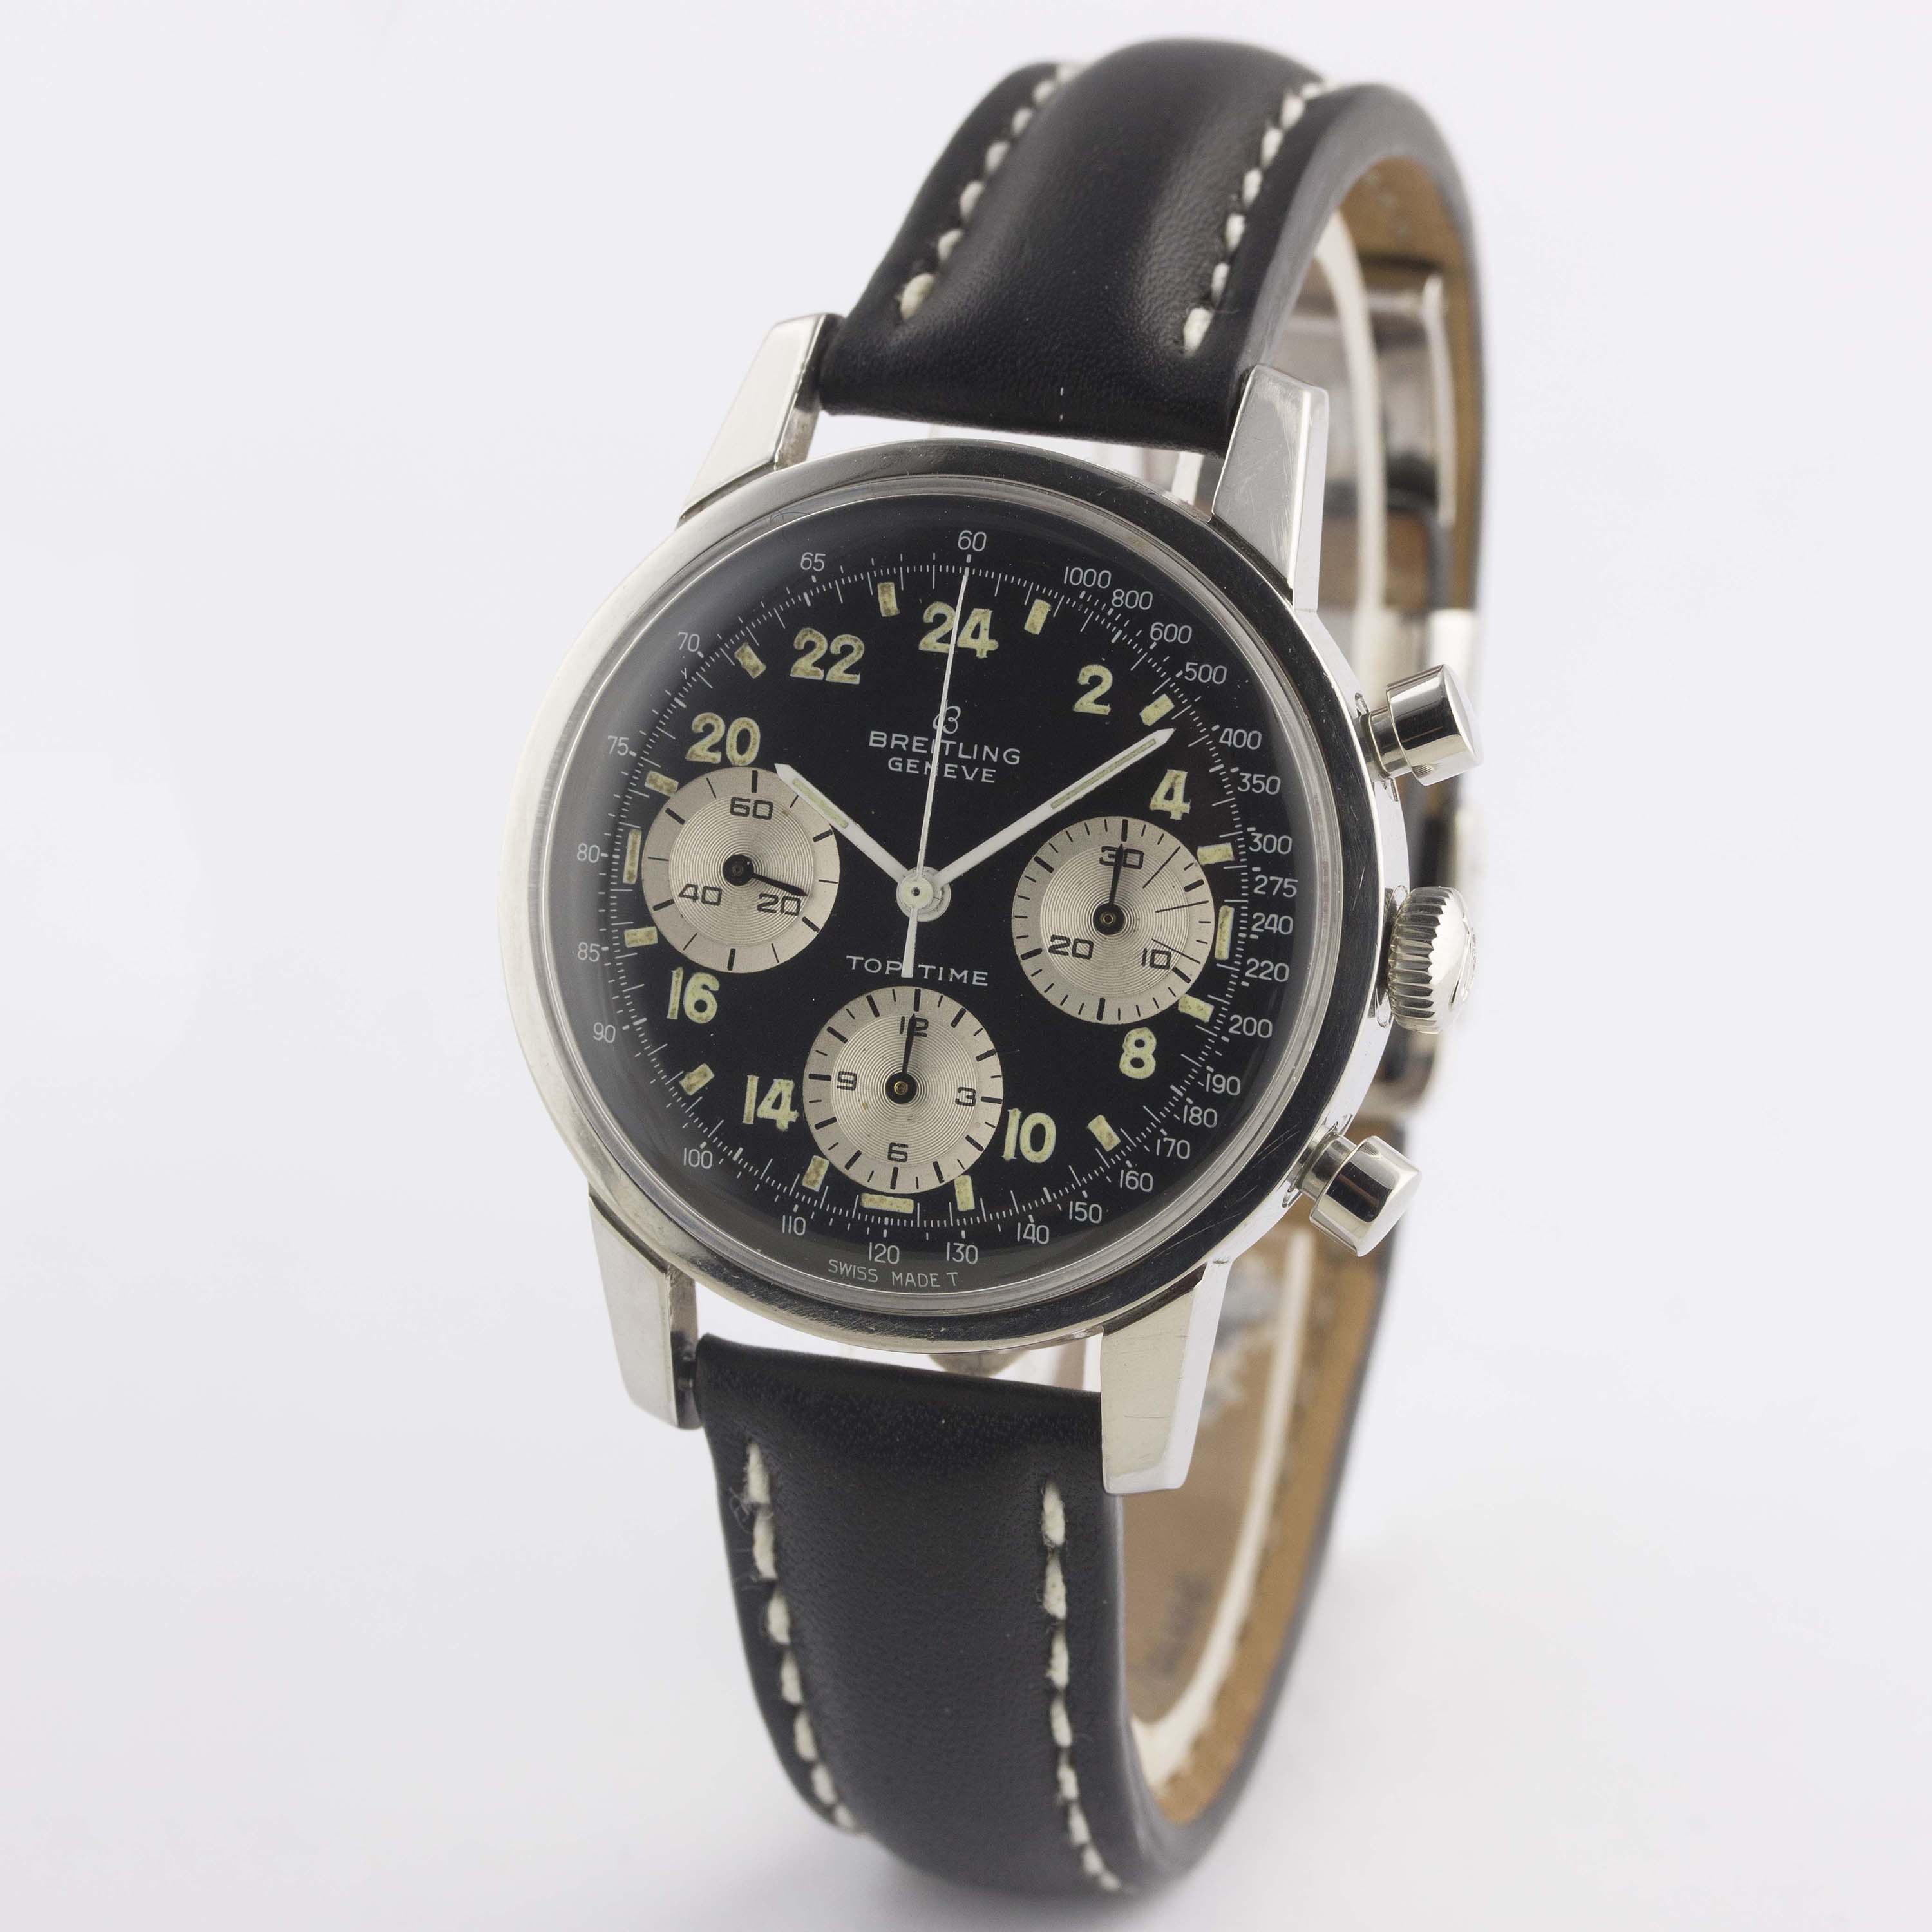 A RARE GENTLEMAN'S STAINLESS STEEL BREITLING TOP TIME 24 HOUR CHRONOGRAPH WRIST WATCH CIRCA 1968, - Image 5 of 12